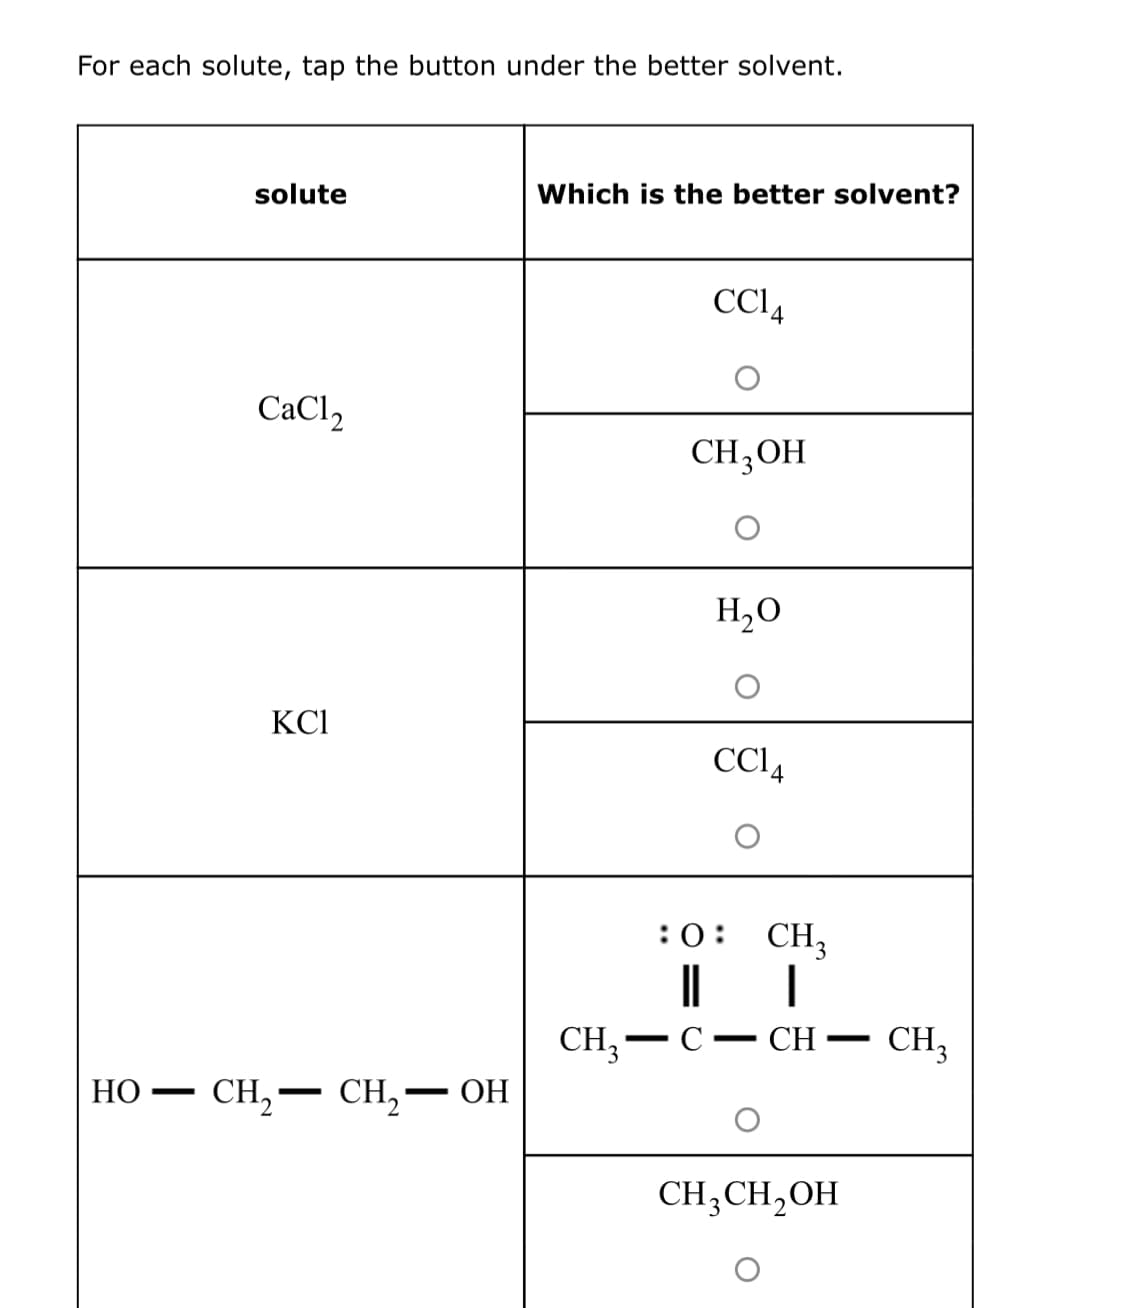 For each solute, tap the button under the better solvent.
solute
Which is the better solvent?
CCI4
CaCl2
CH3OH
H,O
KCI
CCI,
:0: CH3
||
CH;-
CH
CH3
Но — сн, — CH, — ОН
-
CH;CH,OH
